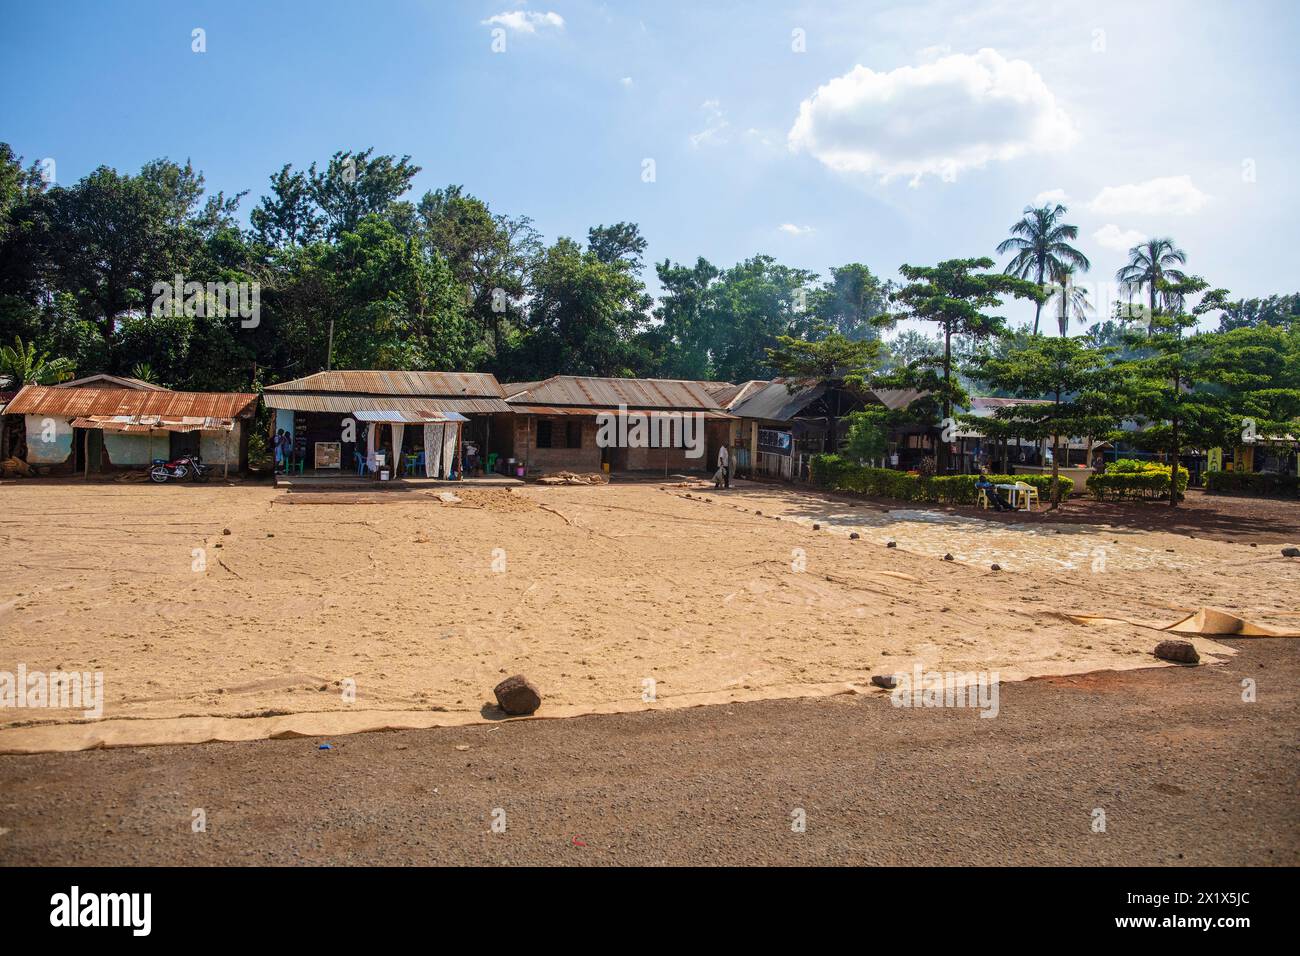 Arusha,Tanzania,Africa. 02 february 2022. near the house, rice was laid out for drying in the sun on large material Stock Photo